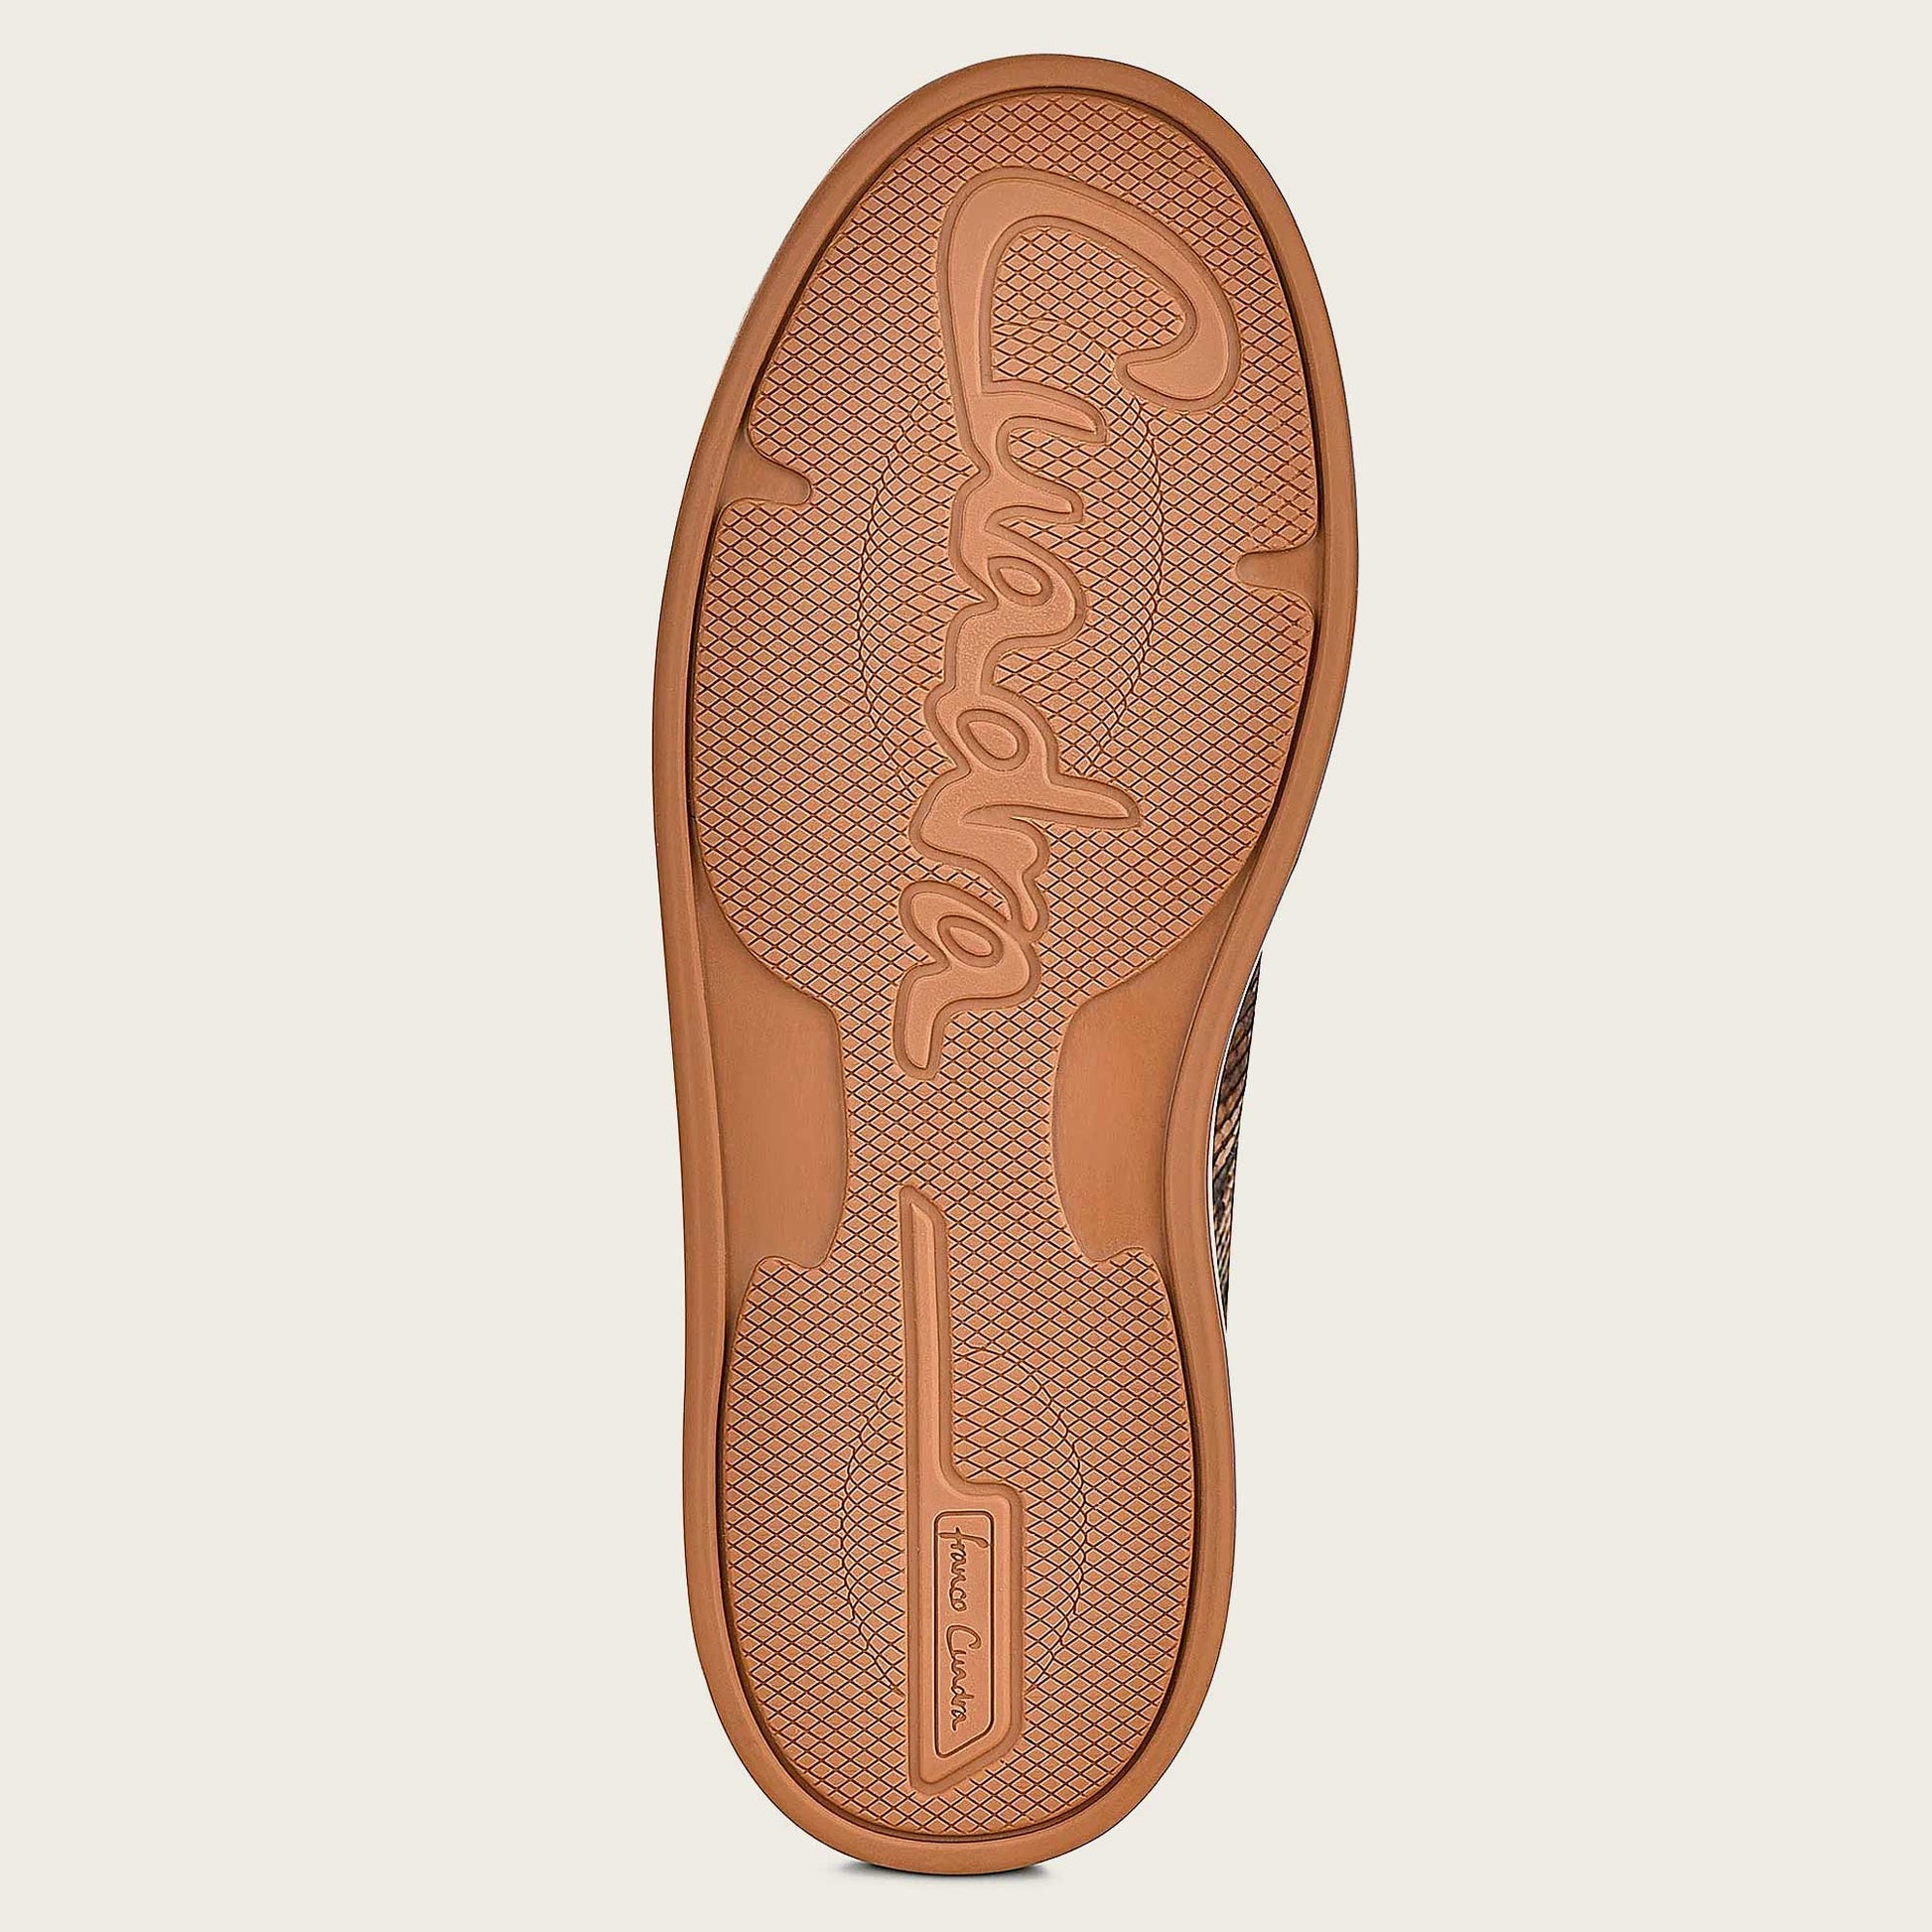 The matte Franco Cuadra logo on the sole subtly conveys the brand's legacy